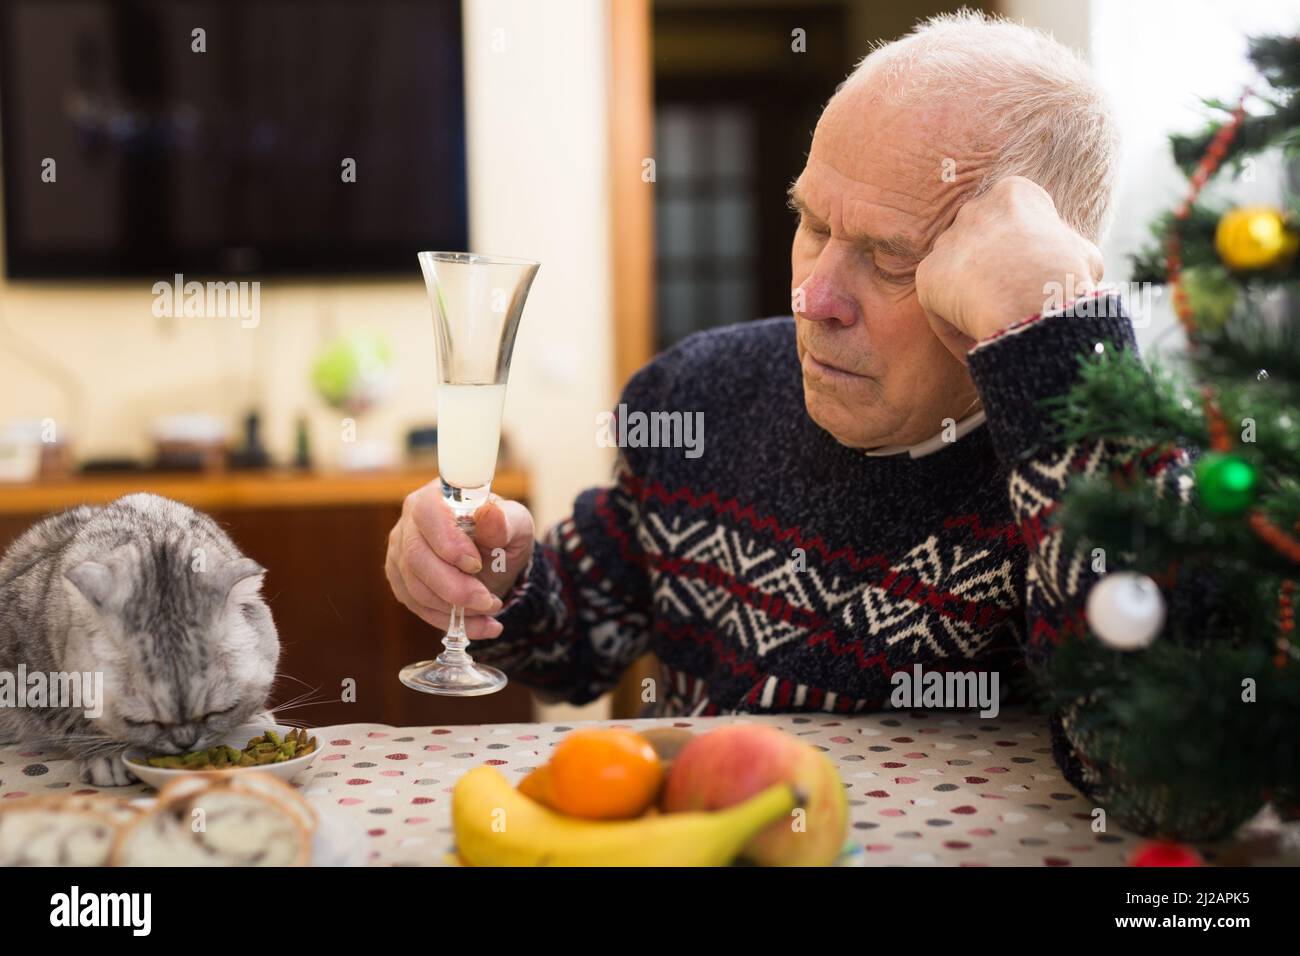 Lonely elderly man feeding cat at table during celebration of New Year Stock Photo